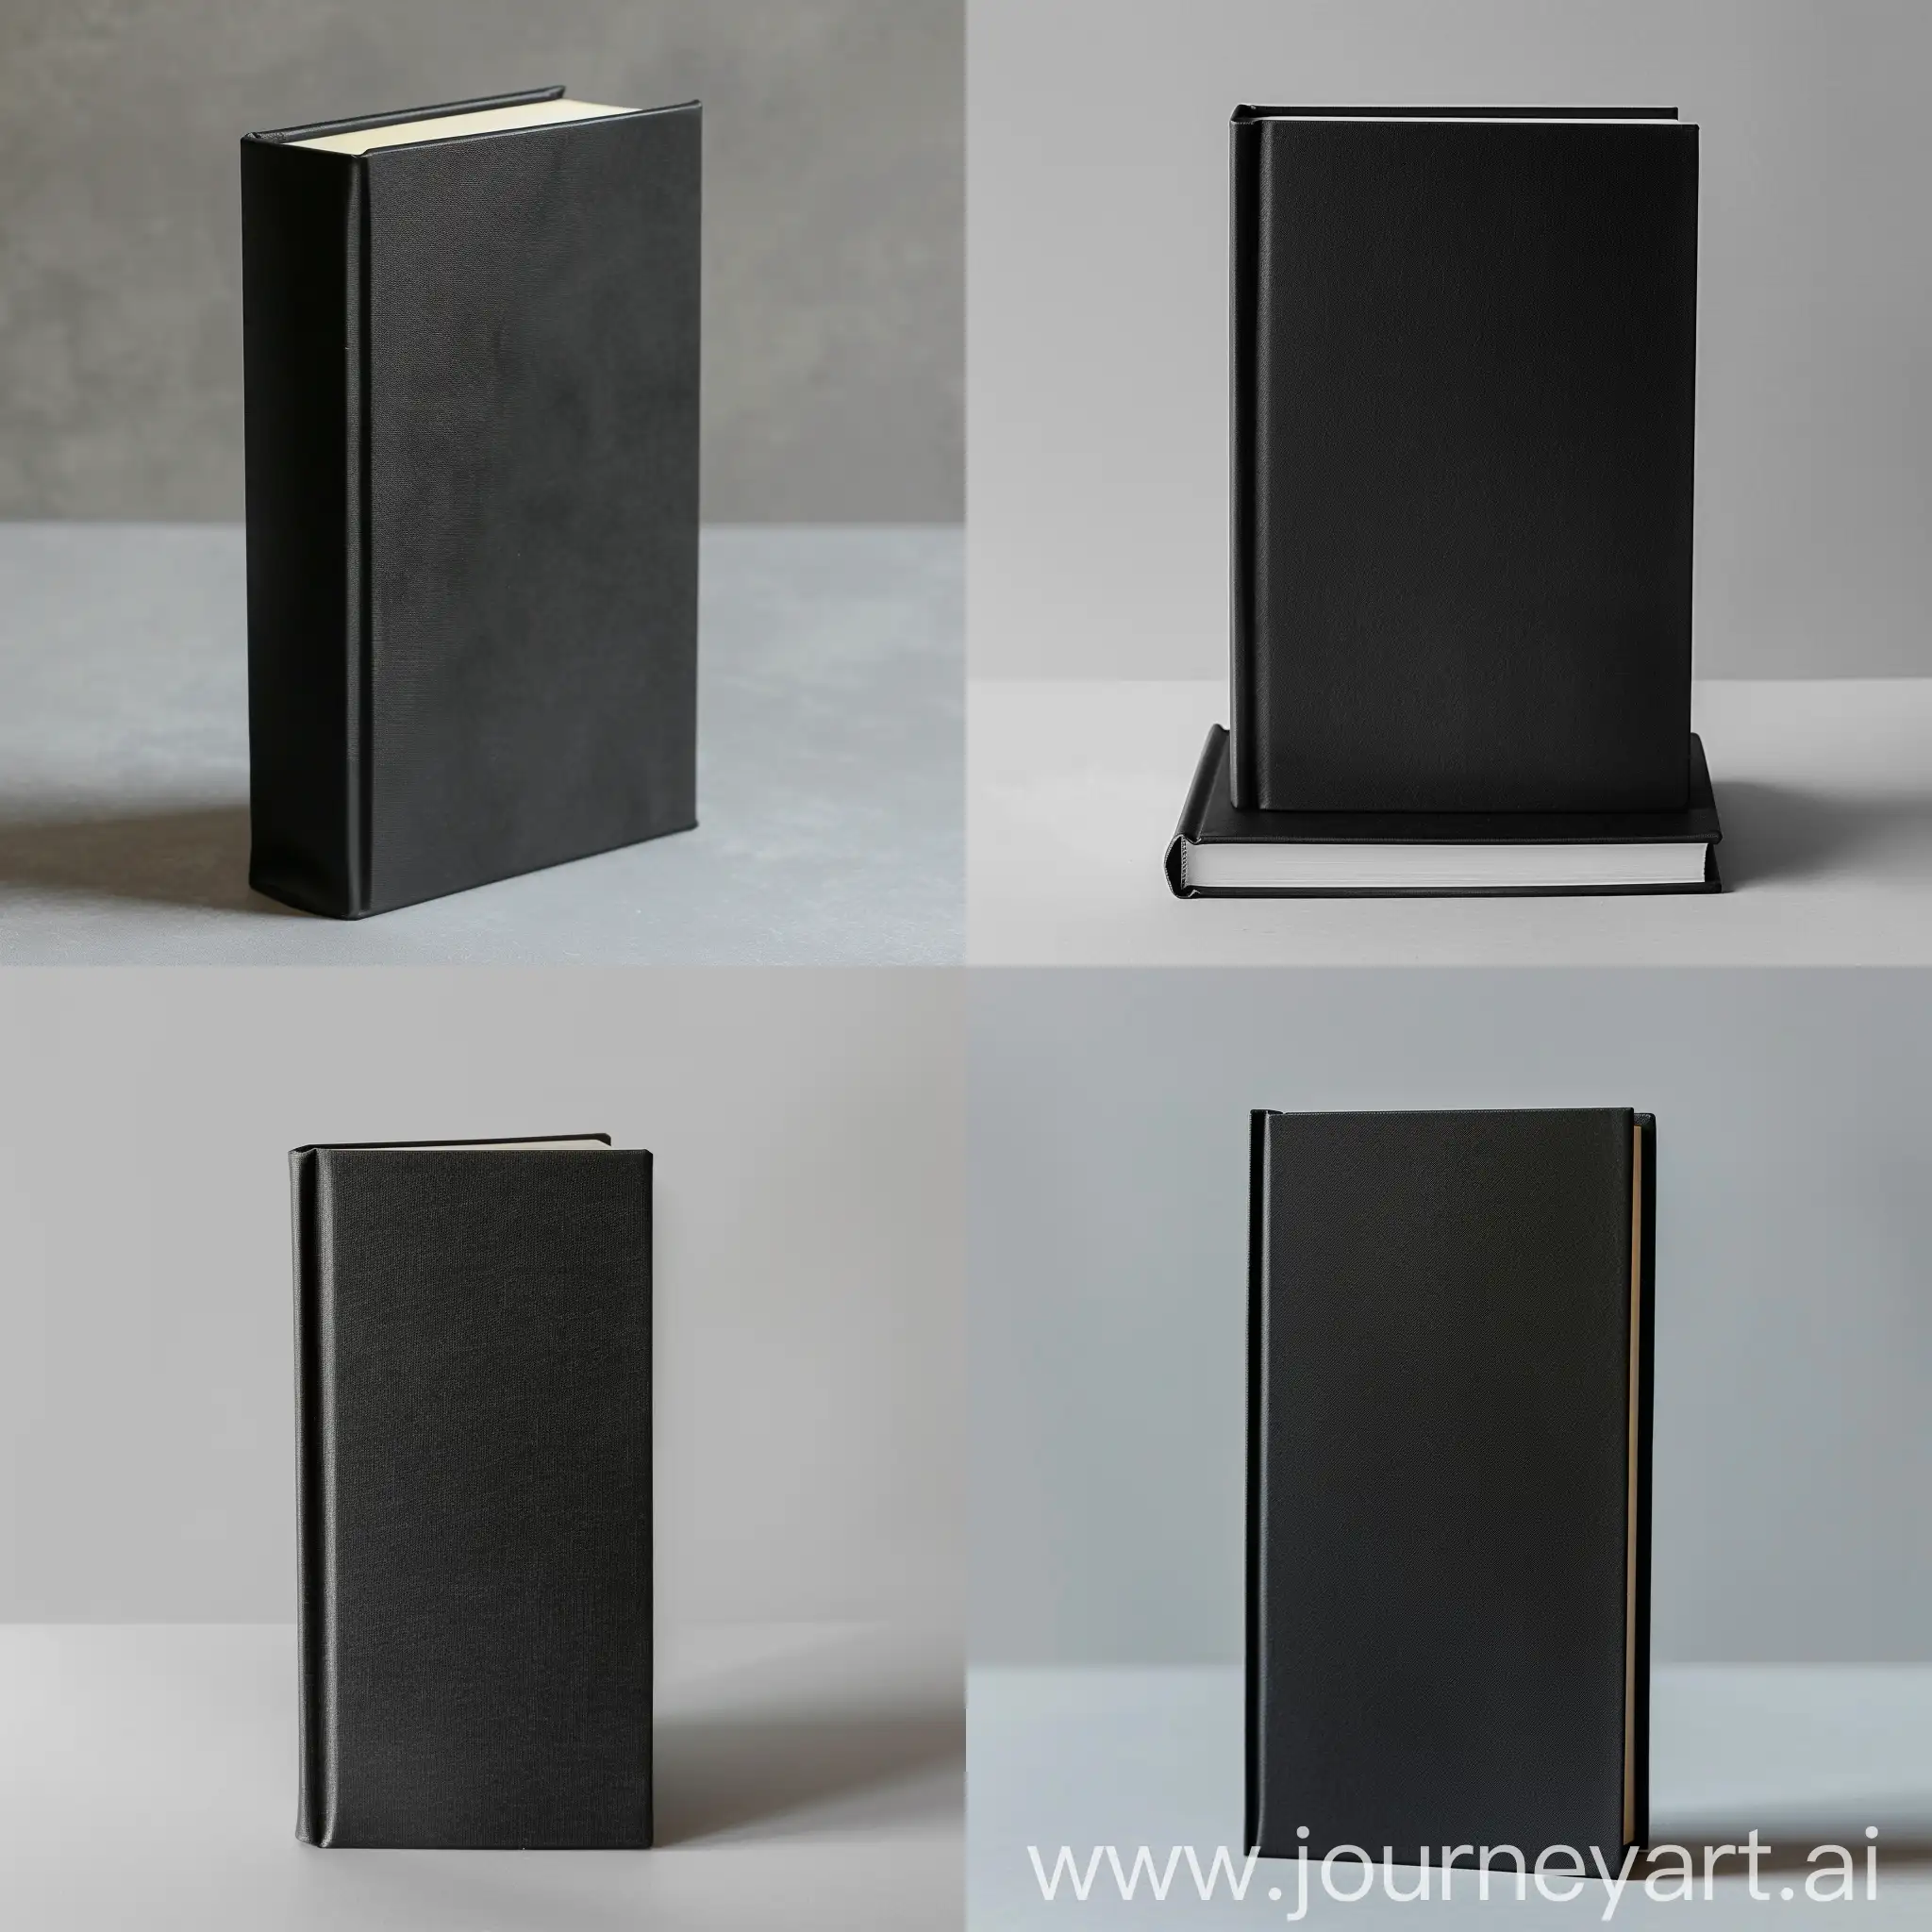 new stylish black book, standing vertically on the table, light gray uniform background